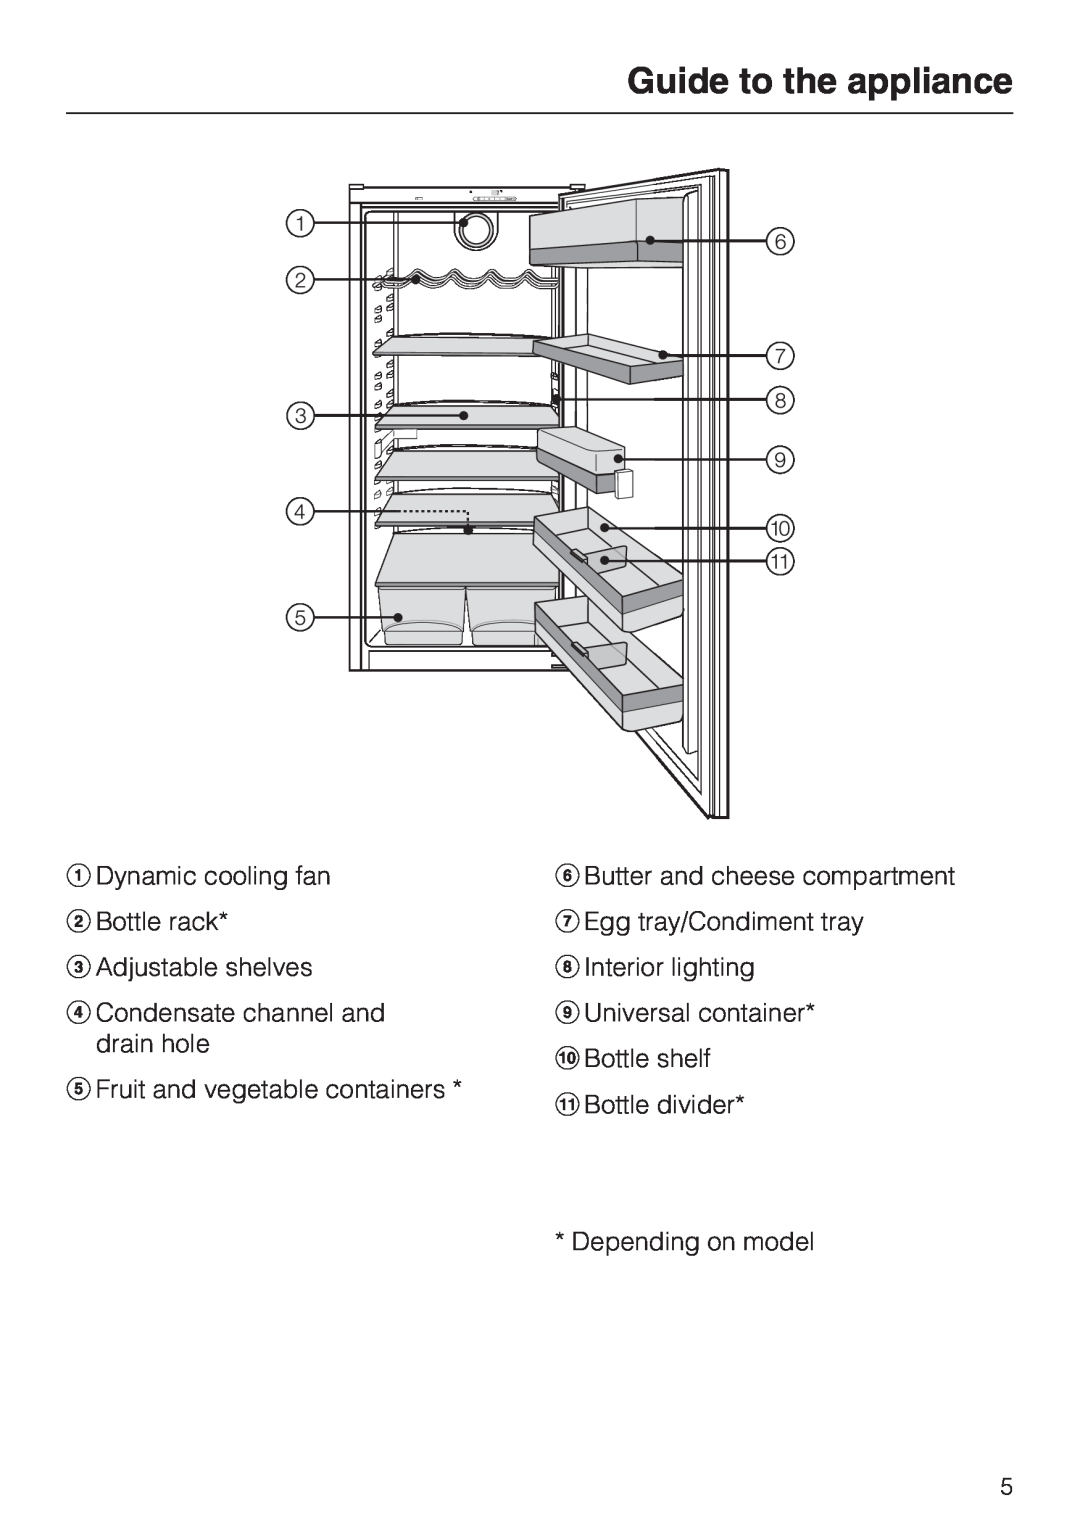 Miele K9552 Guide to the appliance, aDynamic cooling fan bBottle rack, cAdjustable shelves, fButter and cheese compartment 